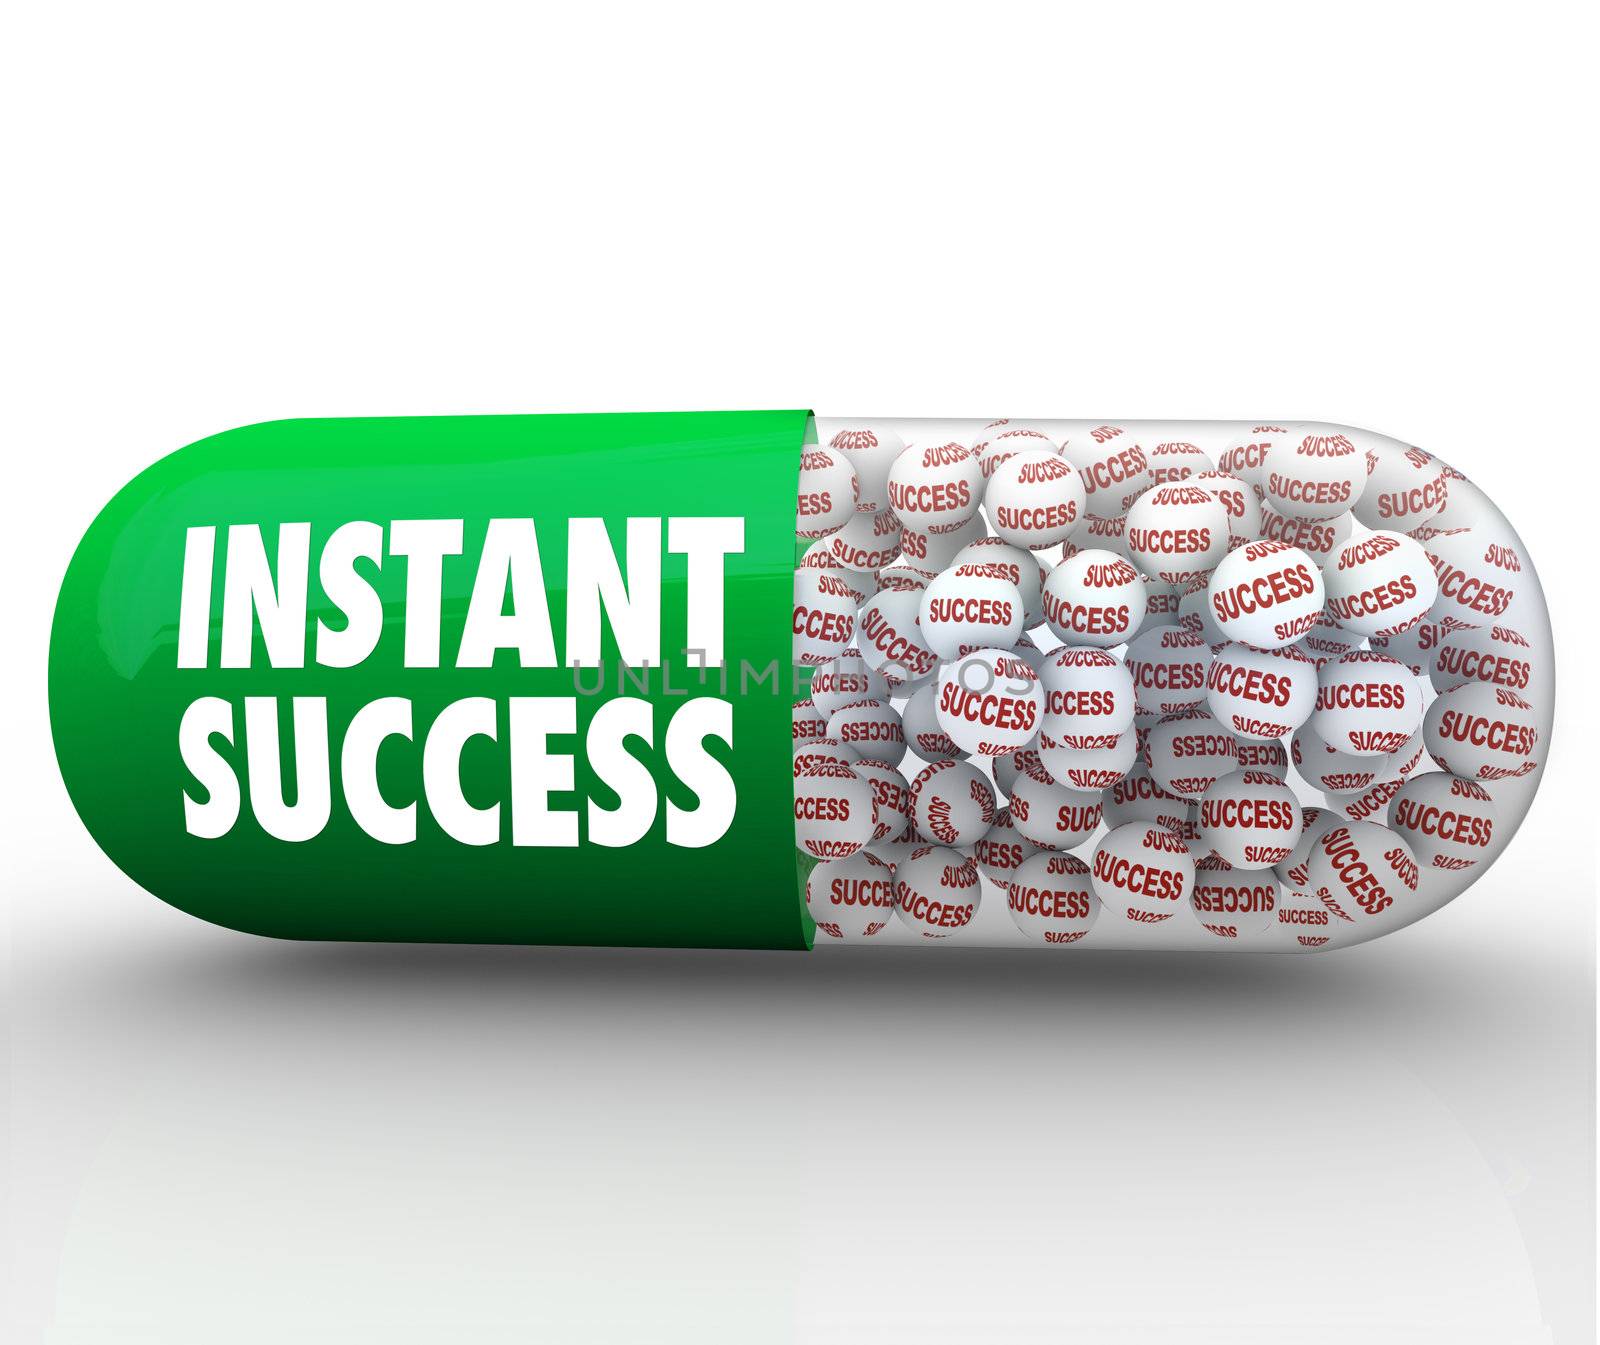 Instant Success - Capsule Pill Promisess Successful Life by iQoncept